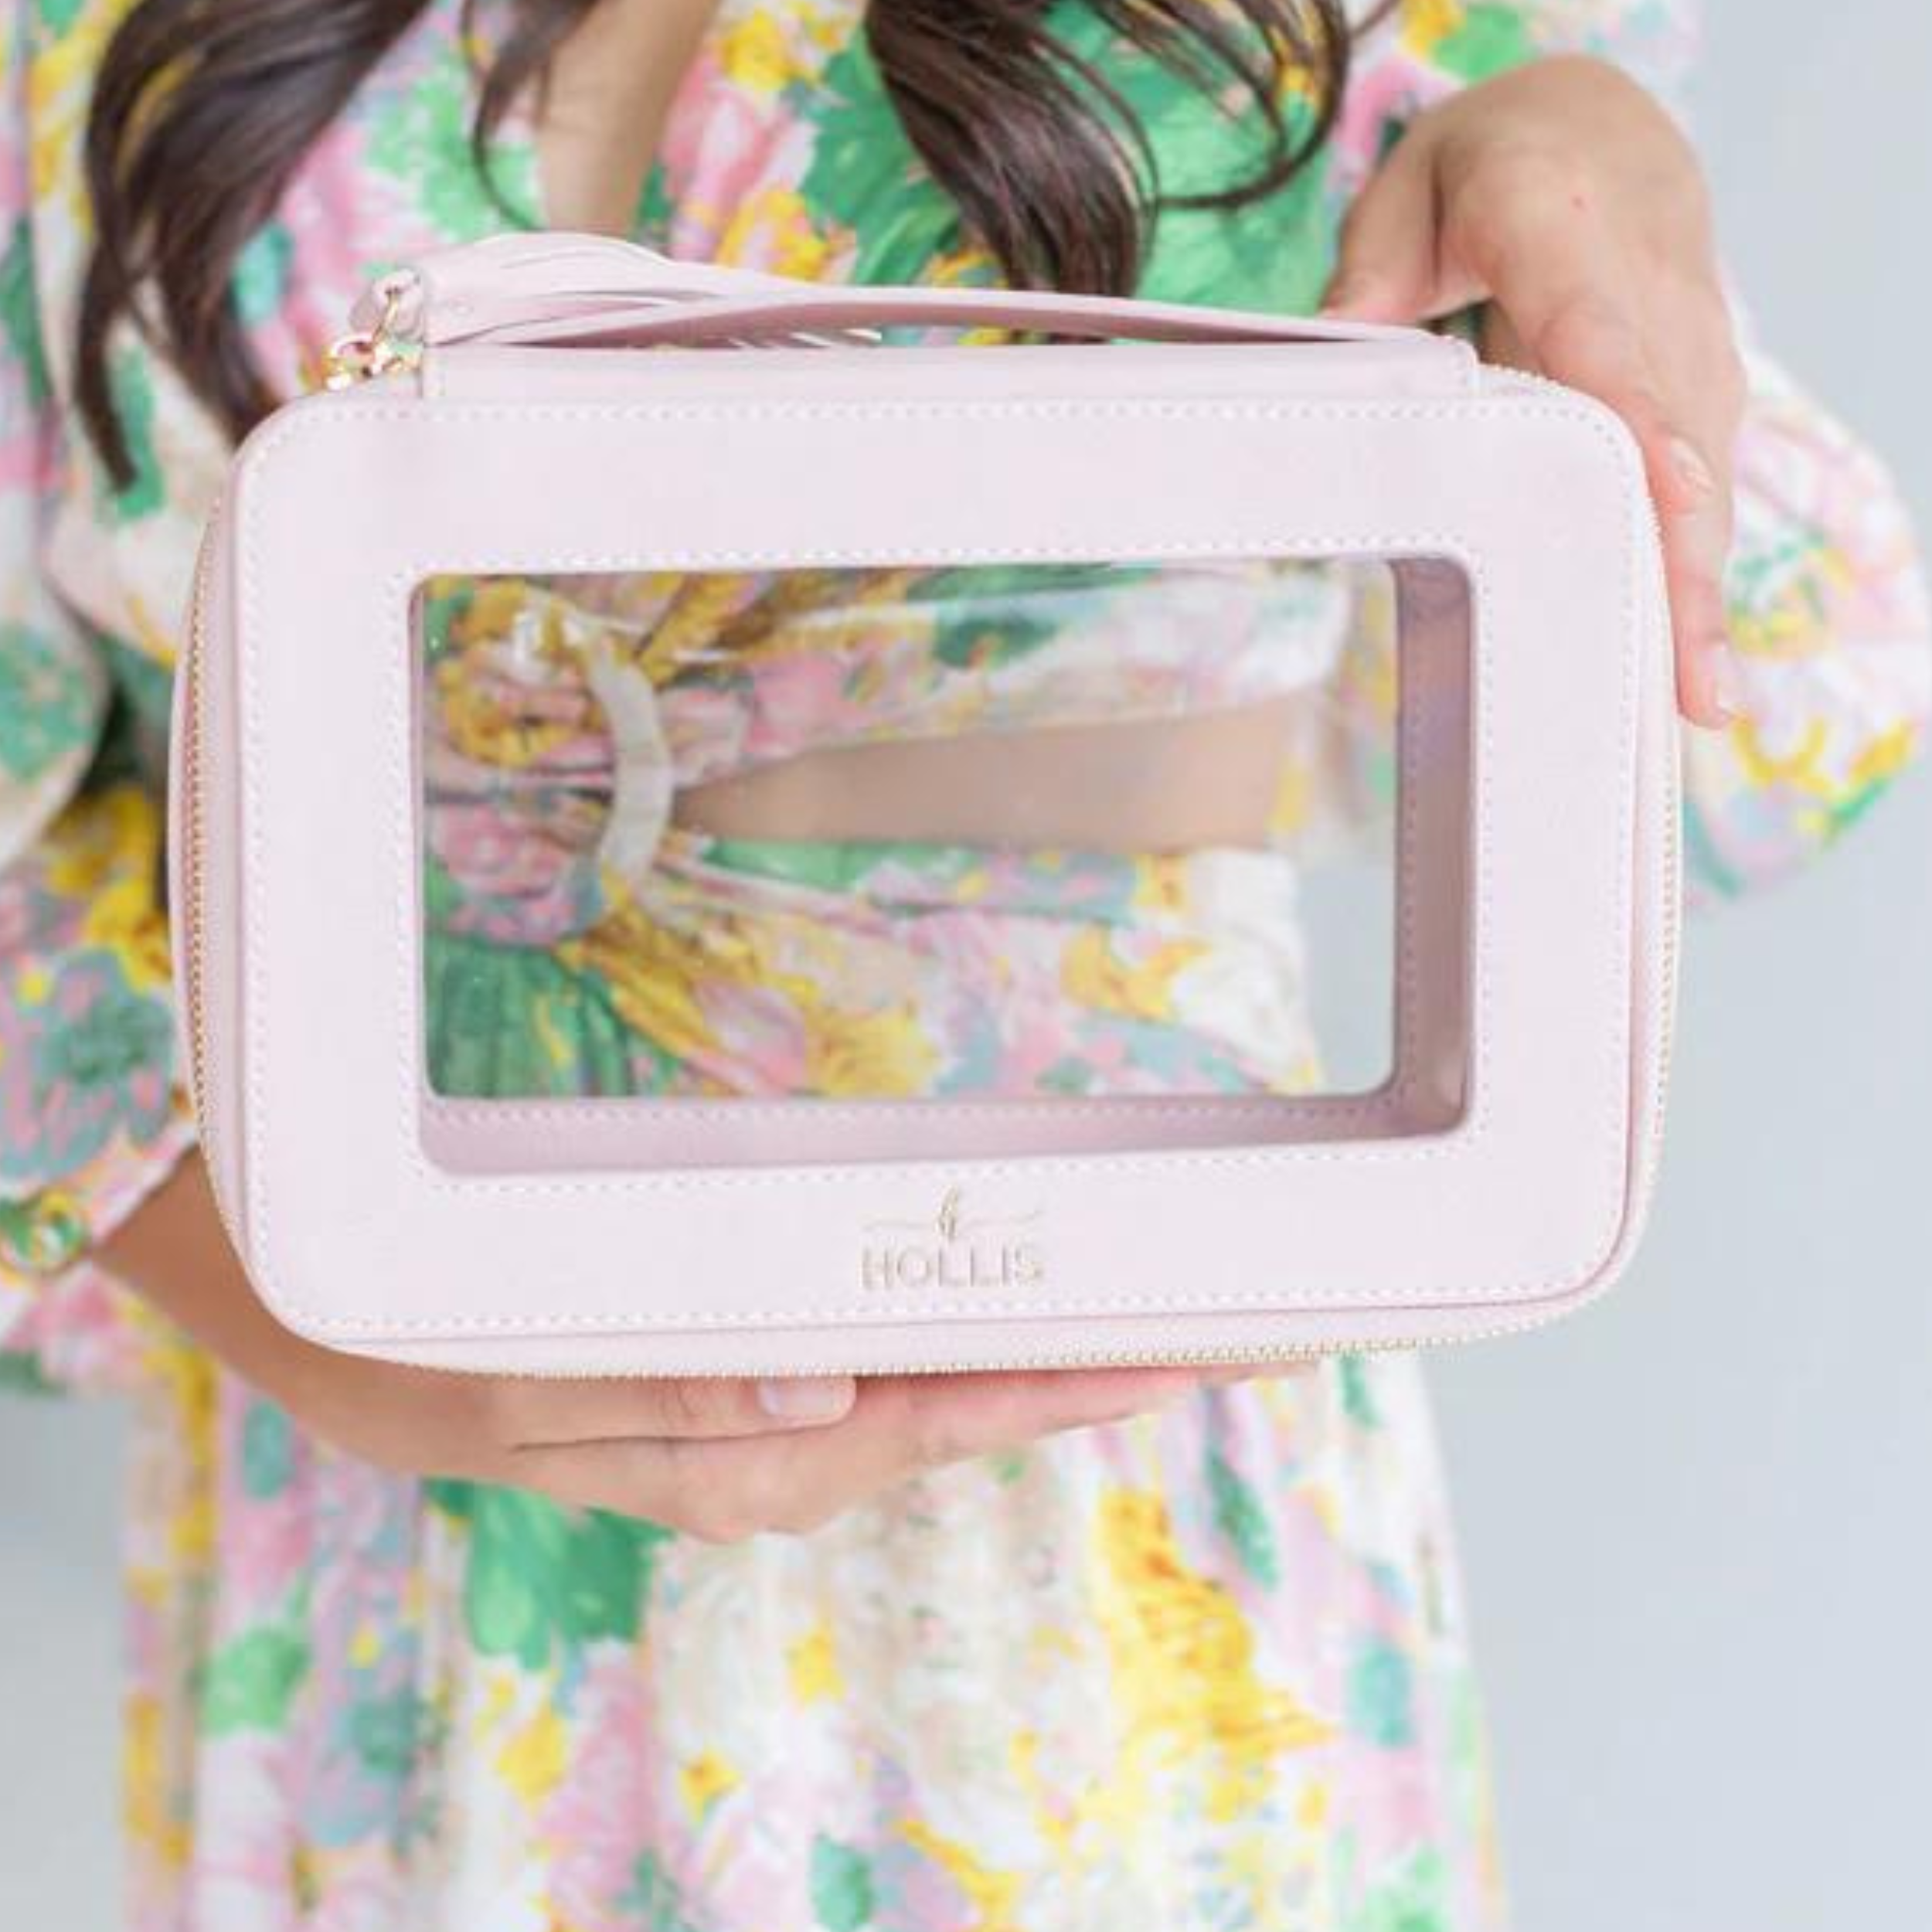 Hollis | Clear Toiletry Bag in Blush - Giddy Up Glamour Boutique